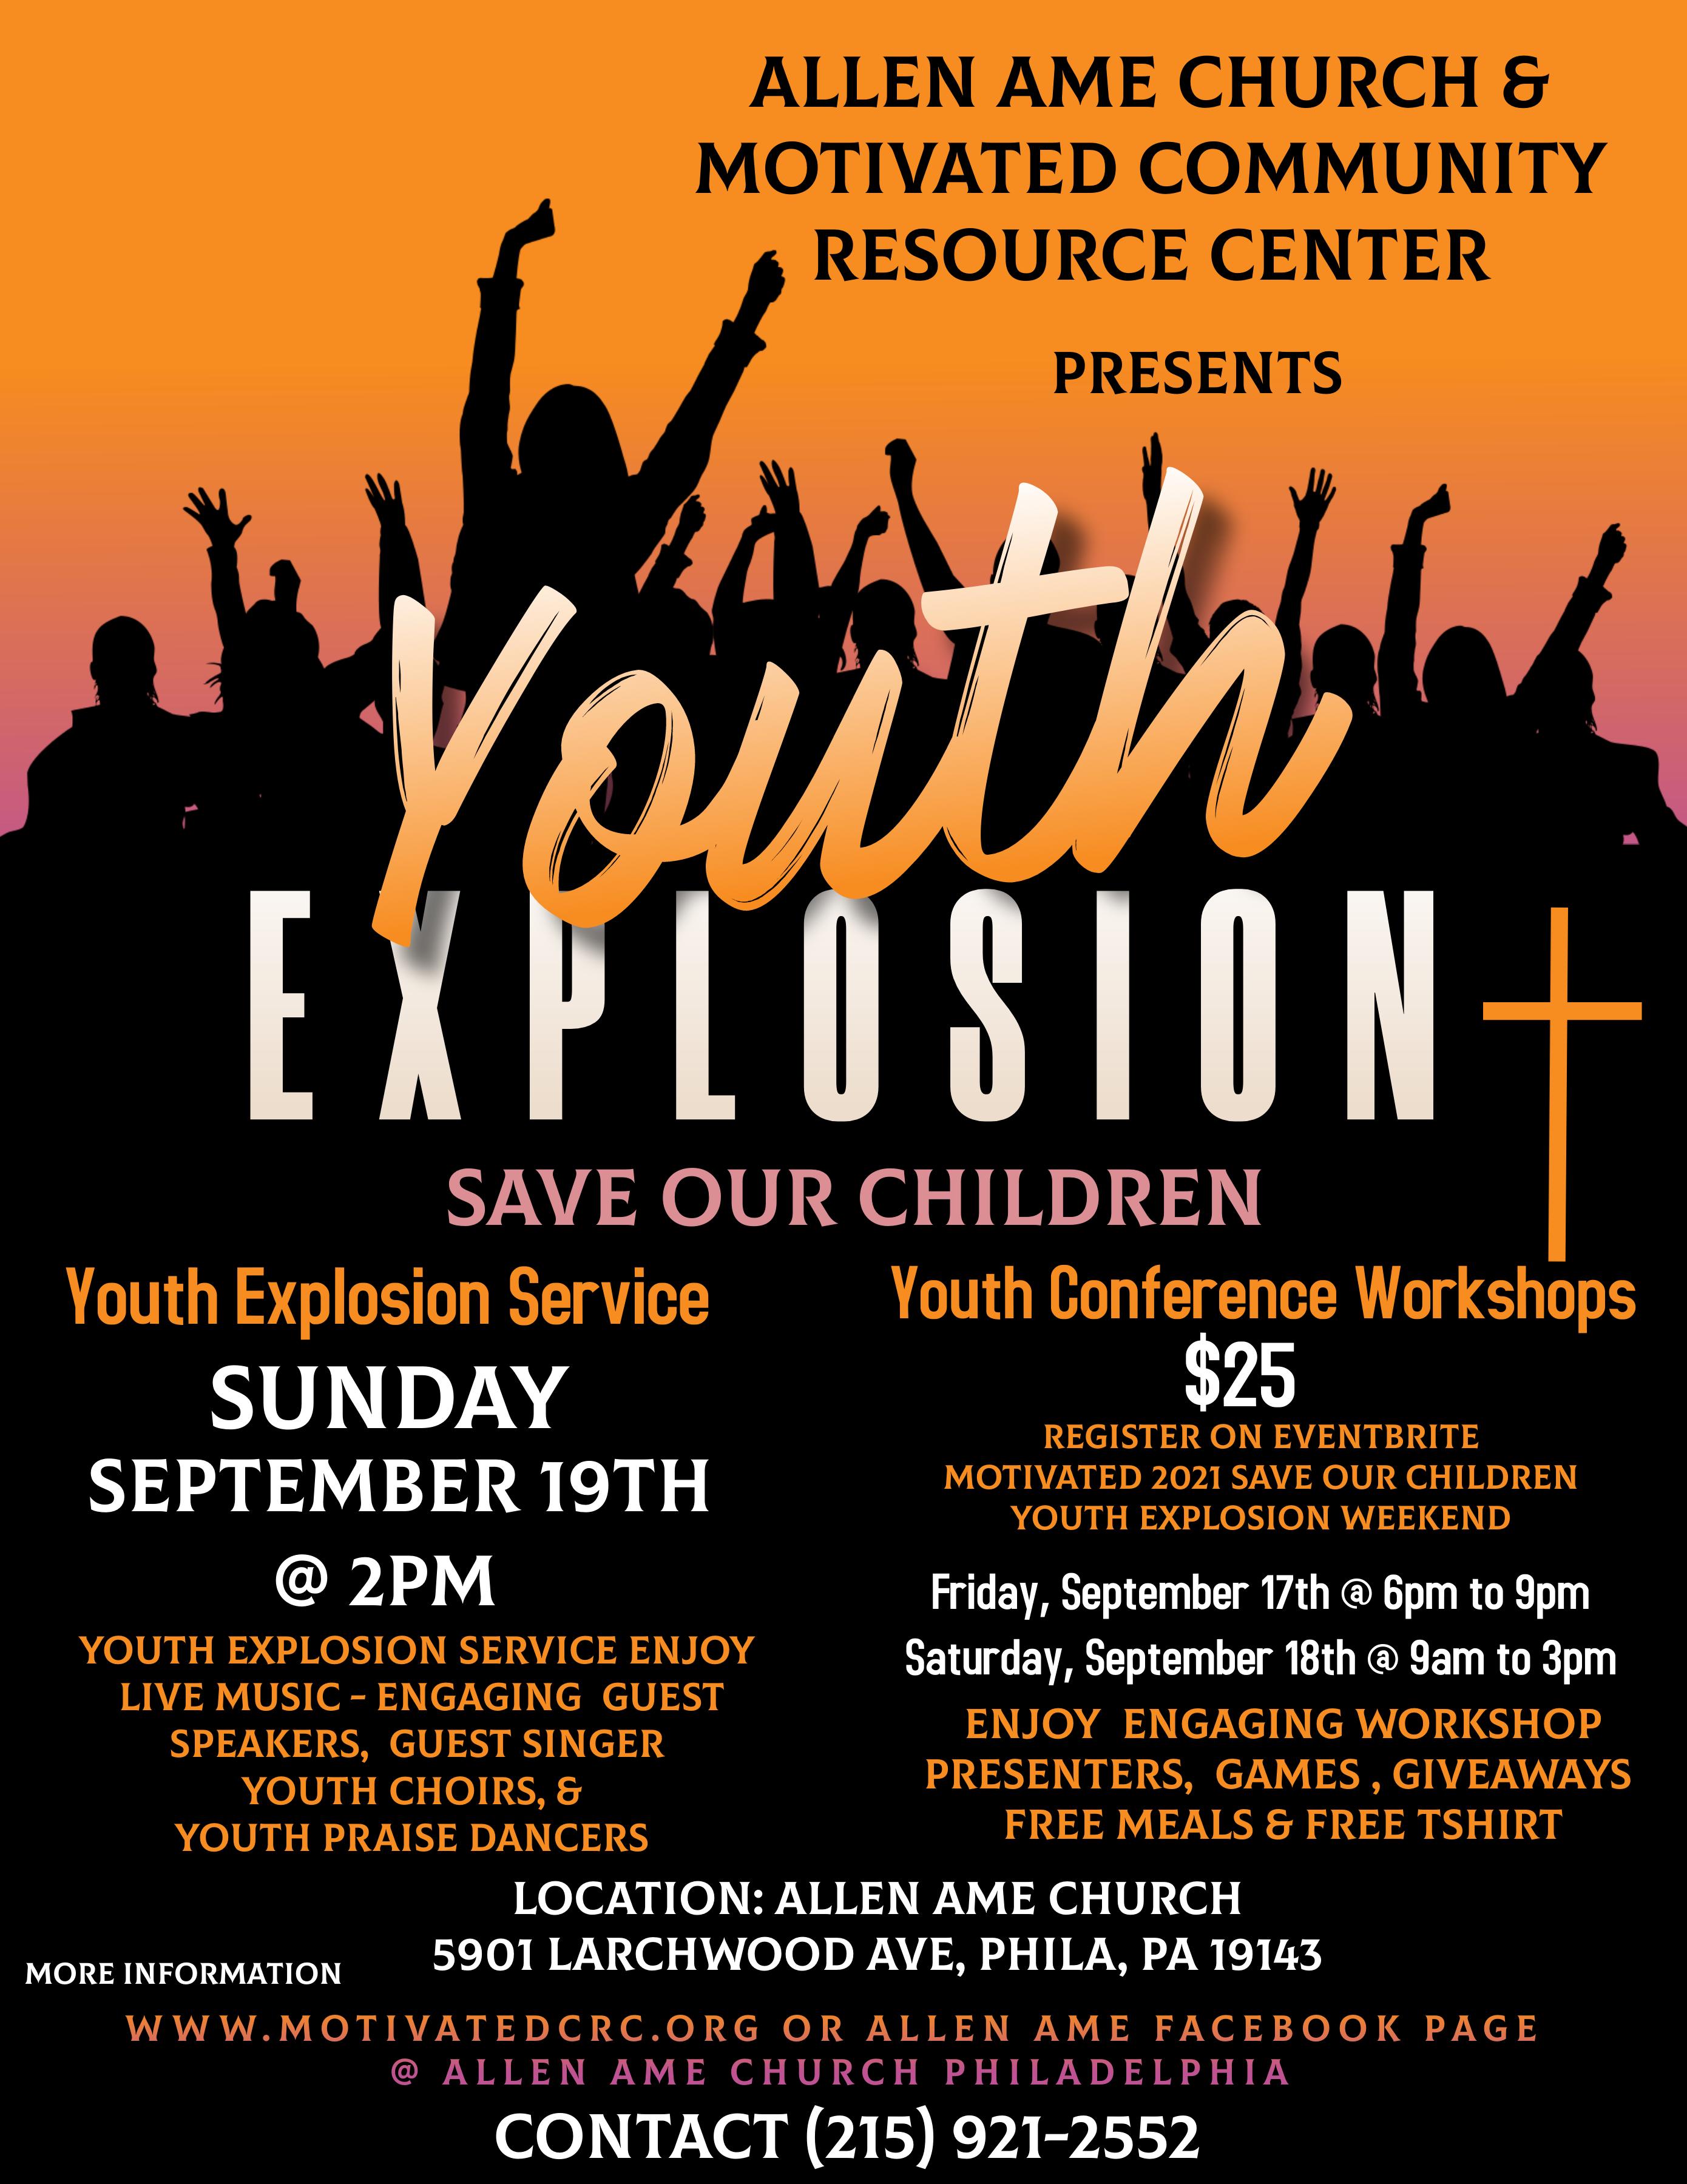 2021 Save our Children Youth Explosion Weekend